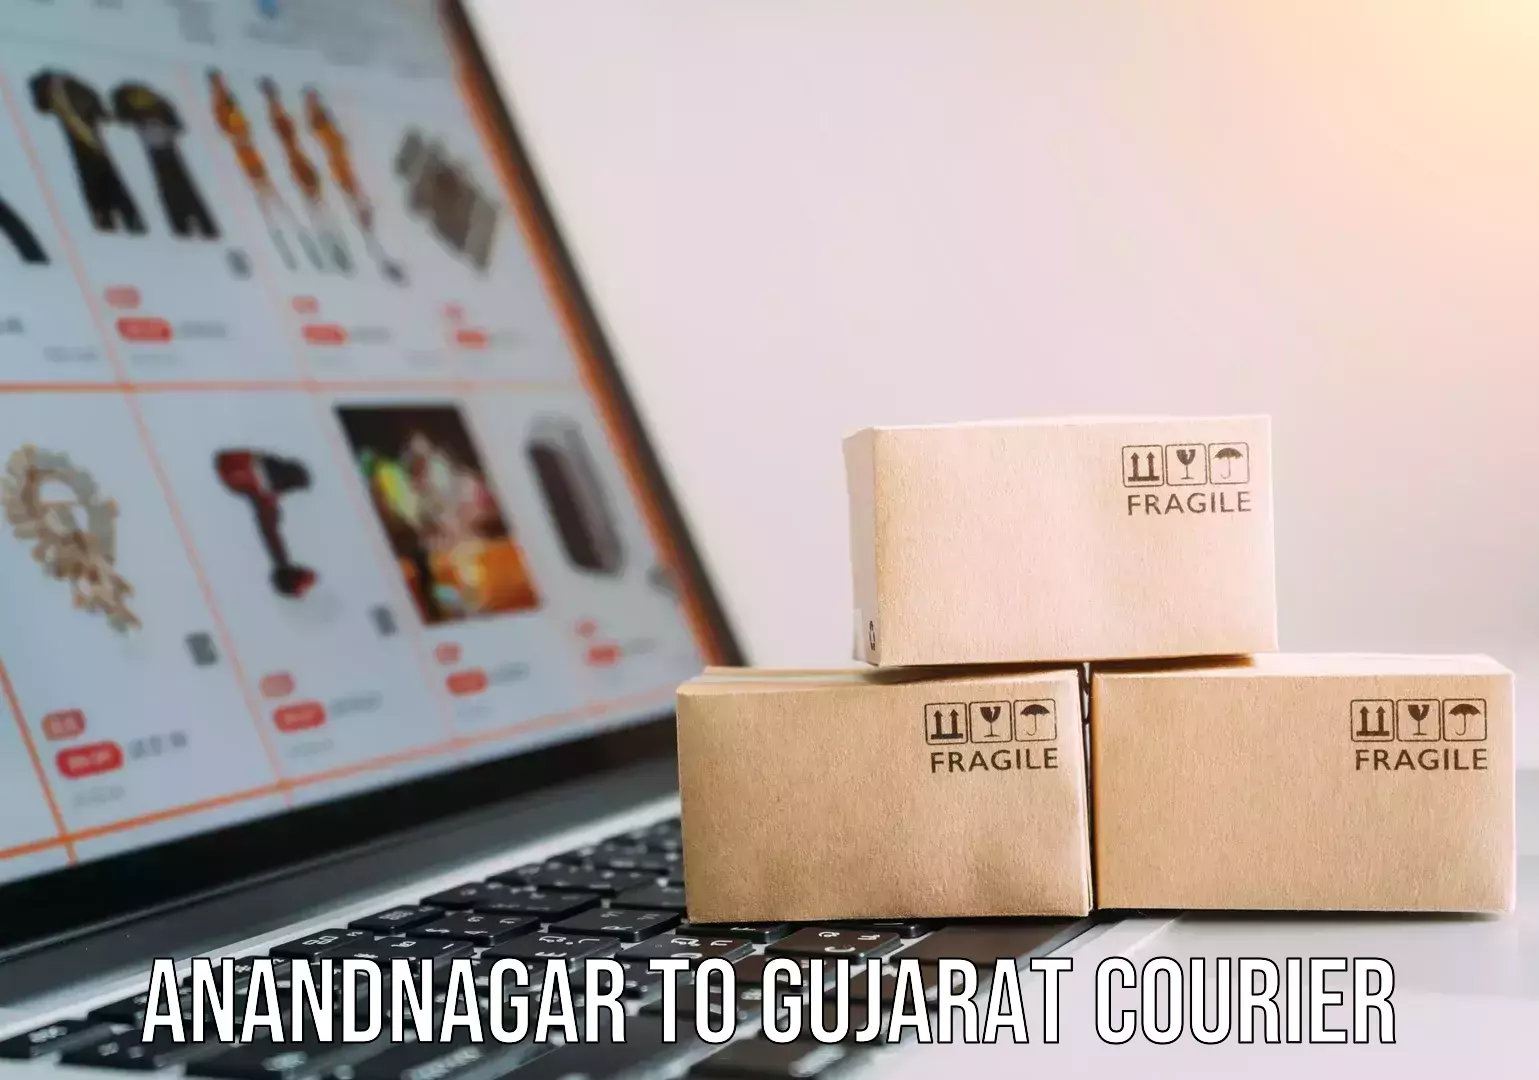 Track and trace shipping in Anandnagar to Gujarat